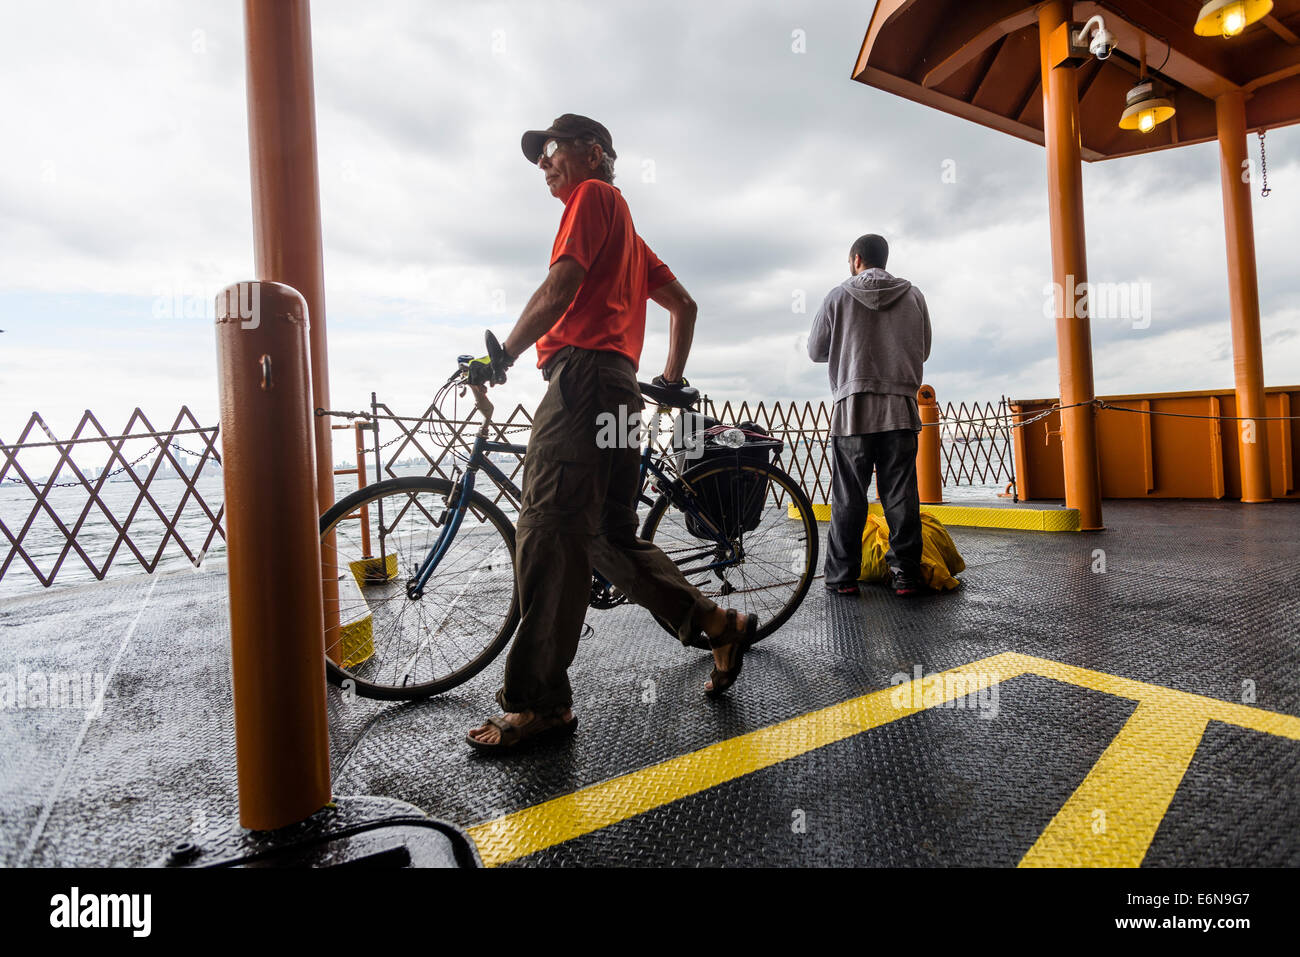 Staten Island, NY - 23 Aug 2014 - Bicycle commuter on the Staten Island Ferry Stock Photo